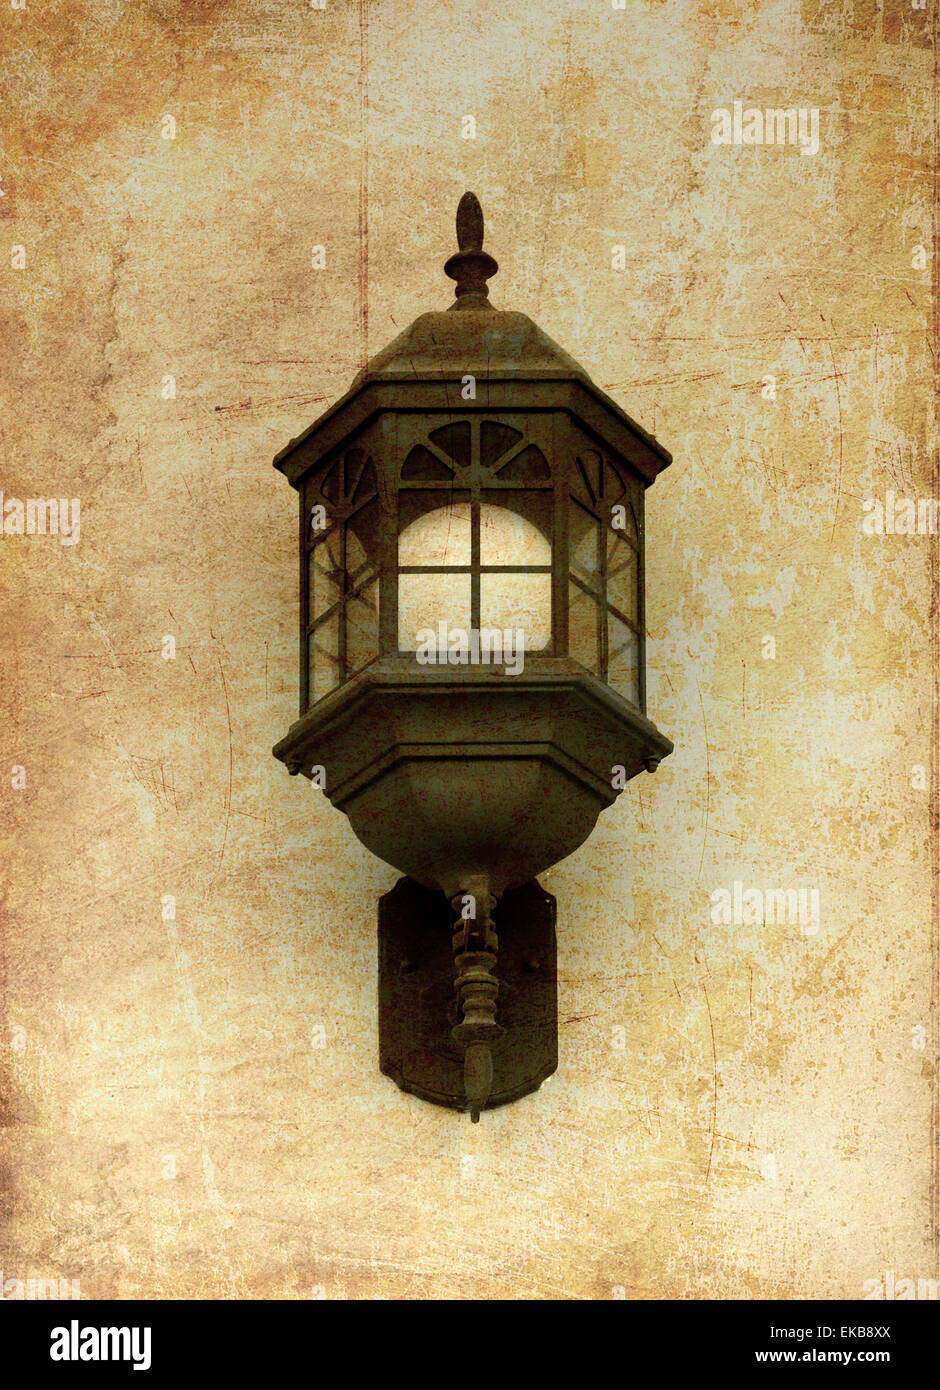 Vintage street lamp, photo in old image style Stock Photo